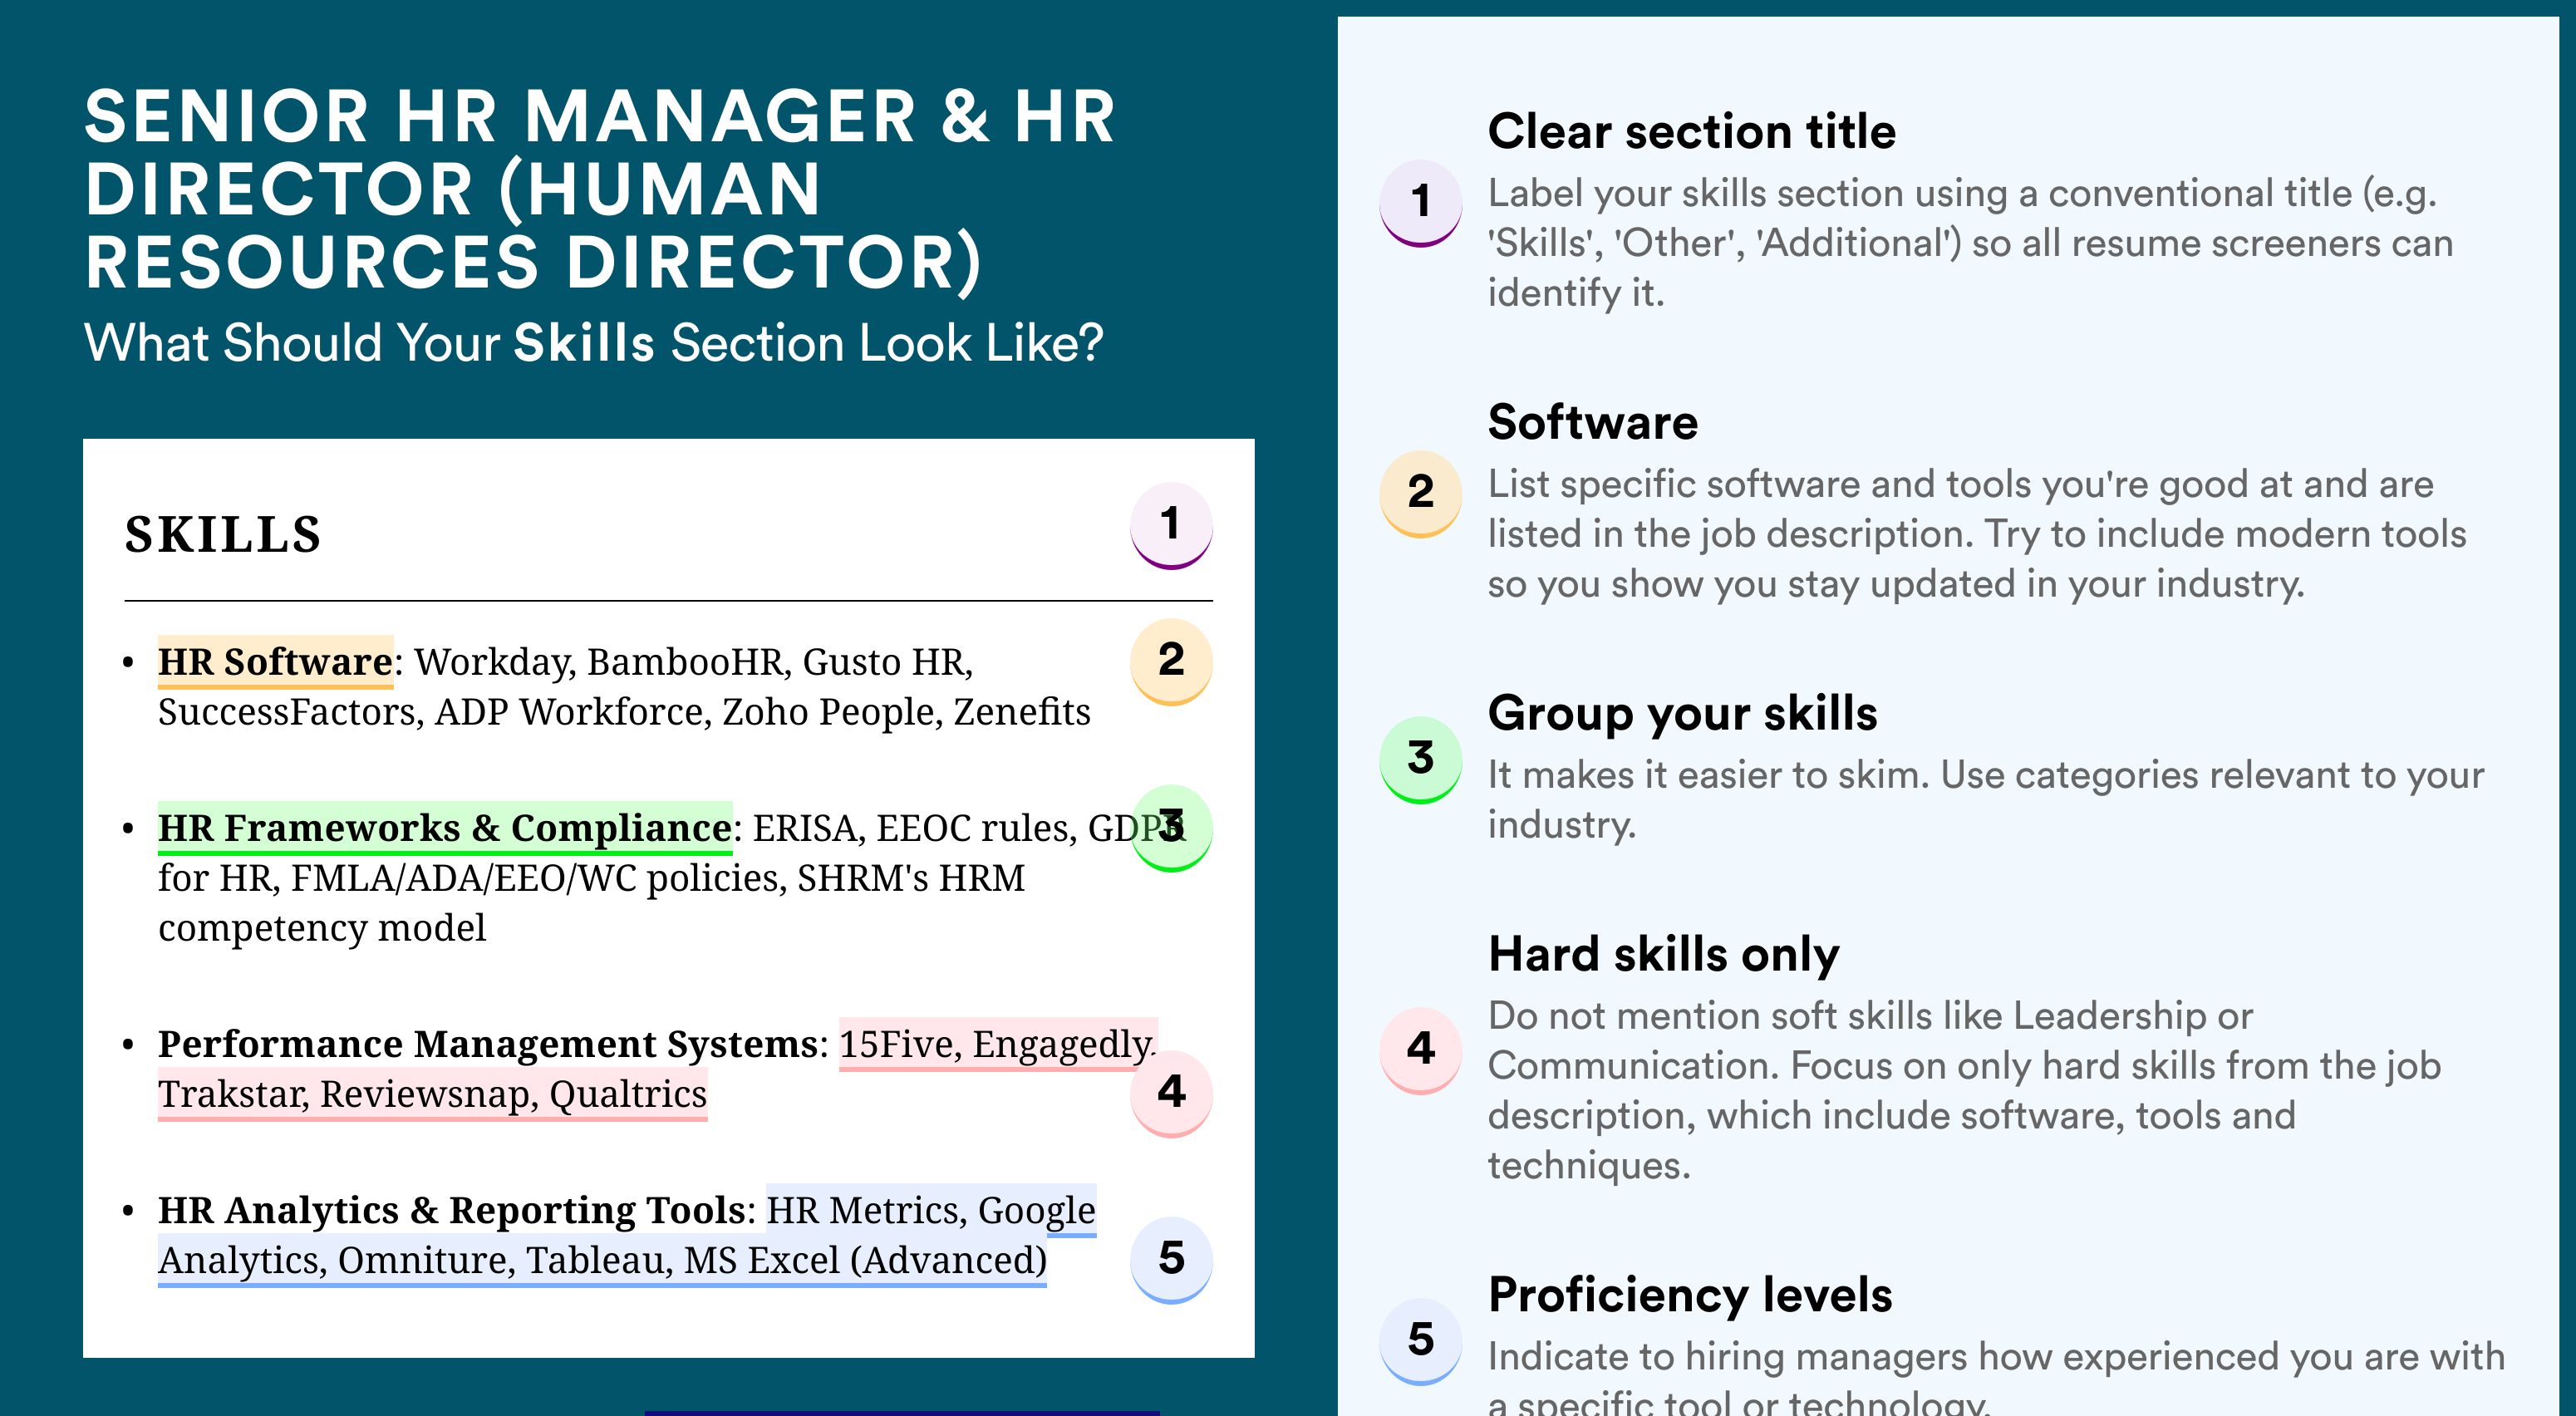 How To Write Your Skills Section - Senior HR Manager & HR Director (Human Resources Director) Roles